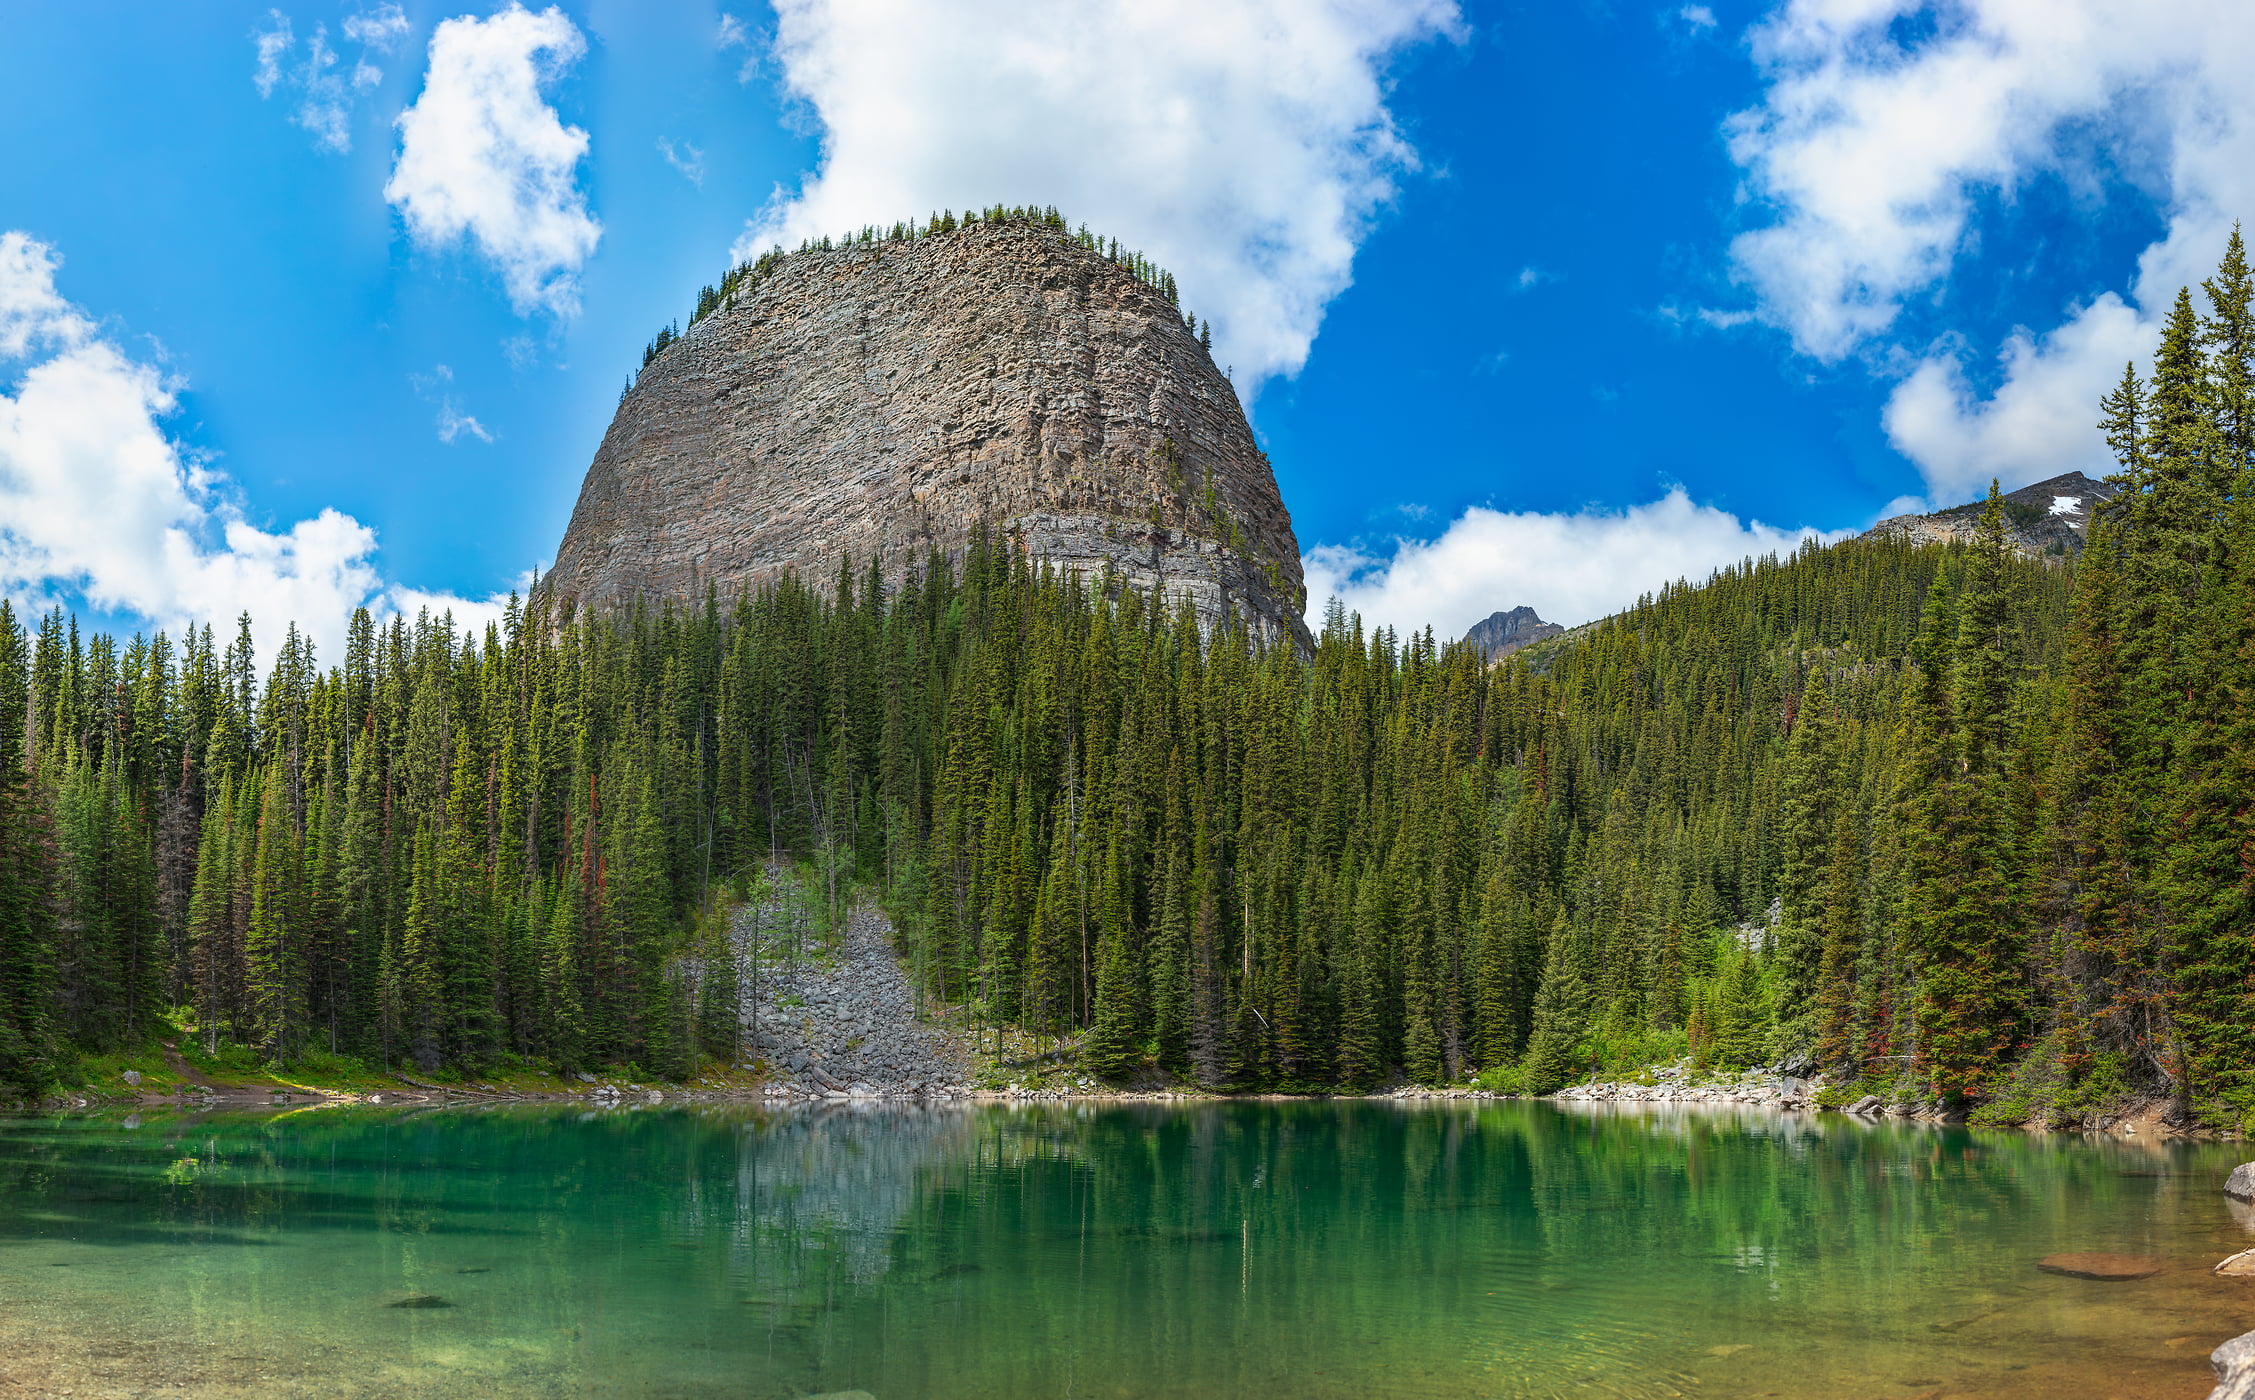 654 megapixels! A very high resolution, large-format VAST photo print of Beehive Mountain in Banff National Park; landscape photograph created by John Freeman at Mirror Lake in Banff National Park, Alberta, Canada